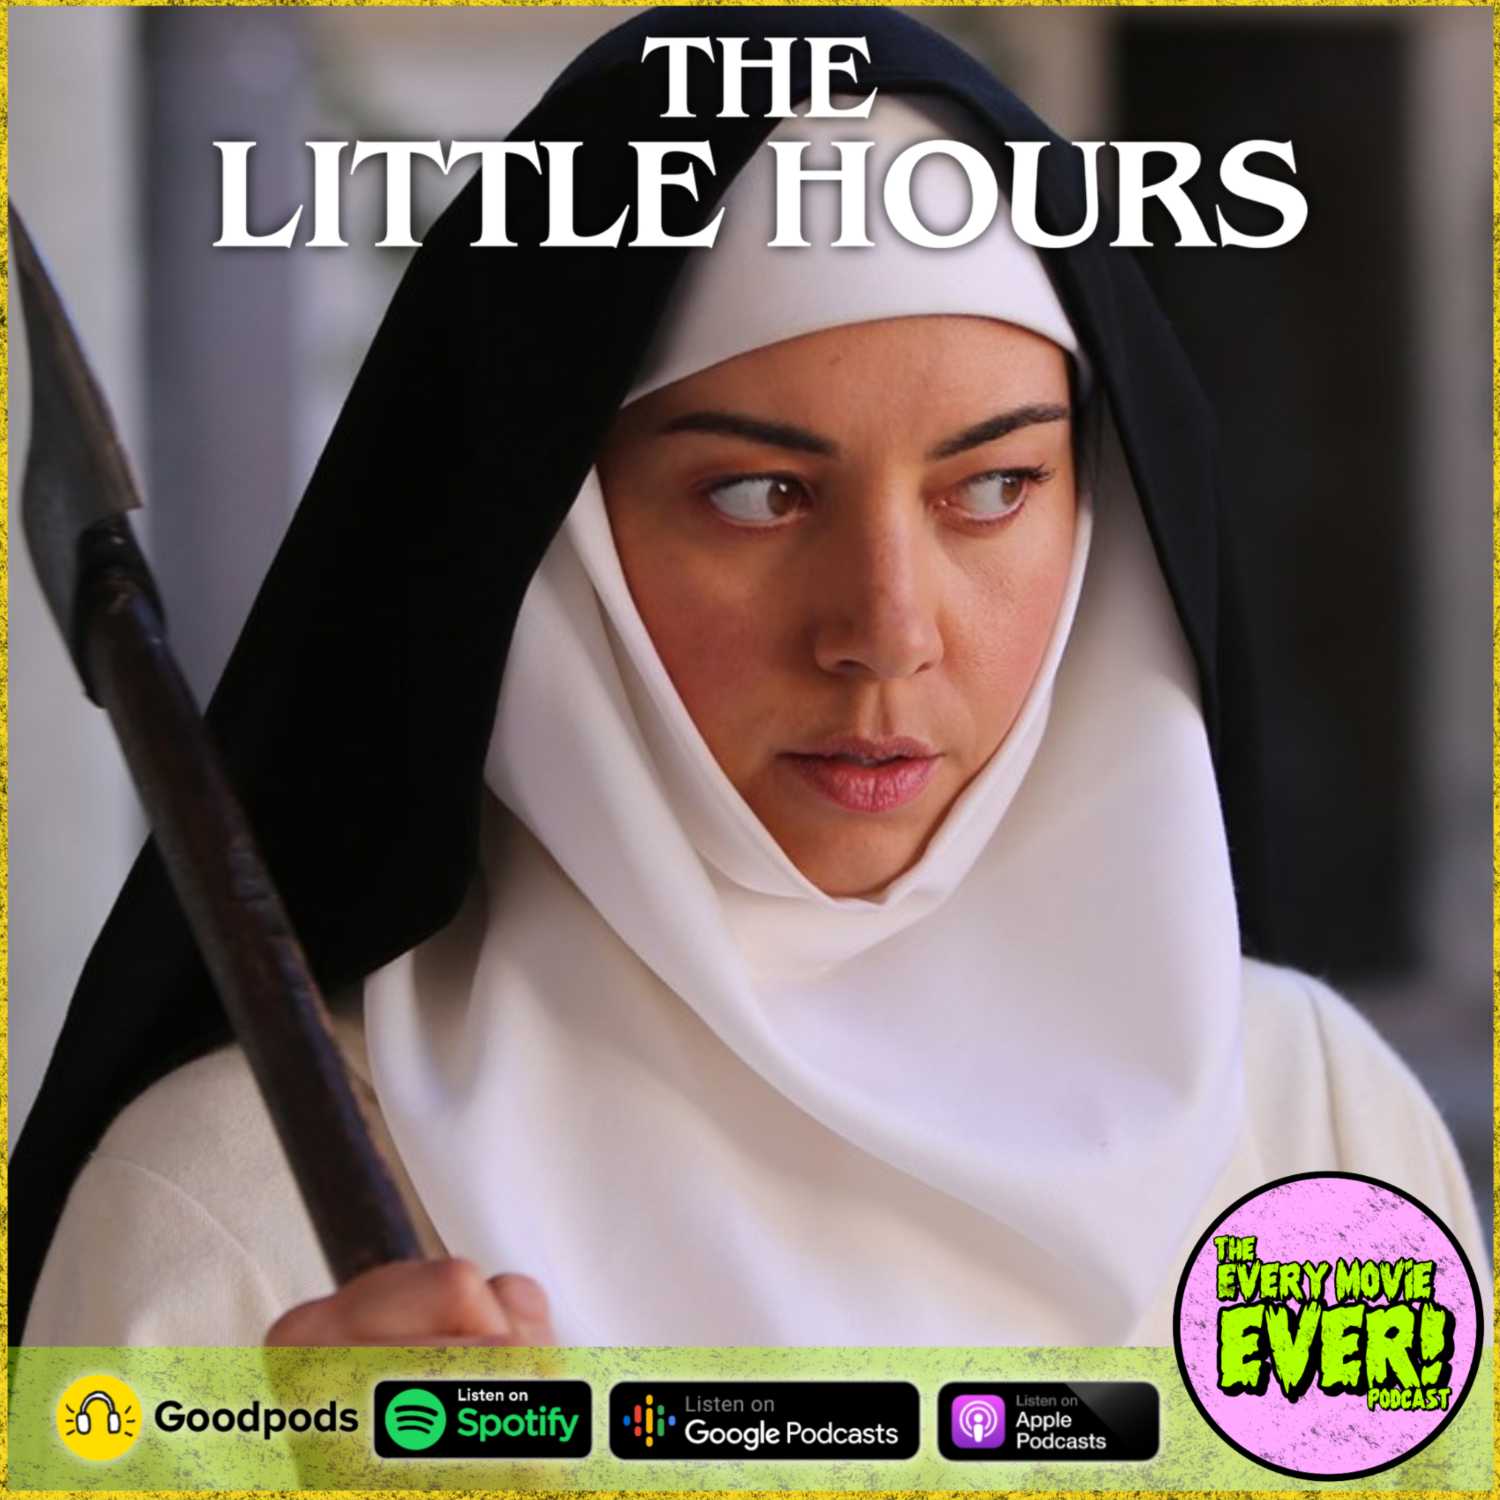 The Little Hours (2017): Nuns, Witches, Adultery, Homosexuality, Lustfulness and... Eating Blood?